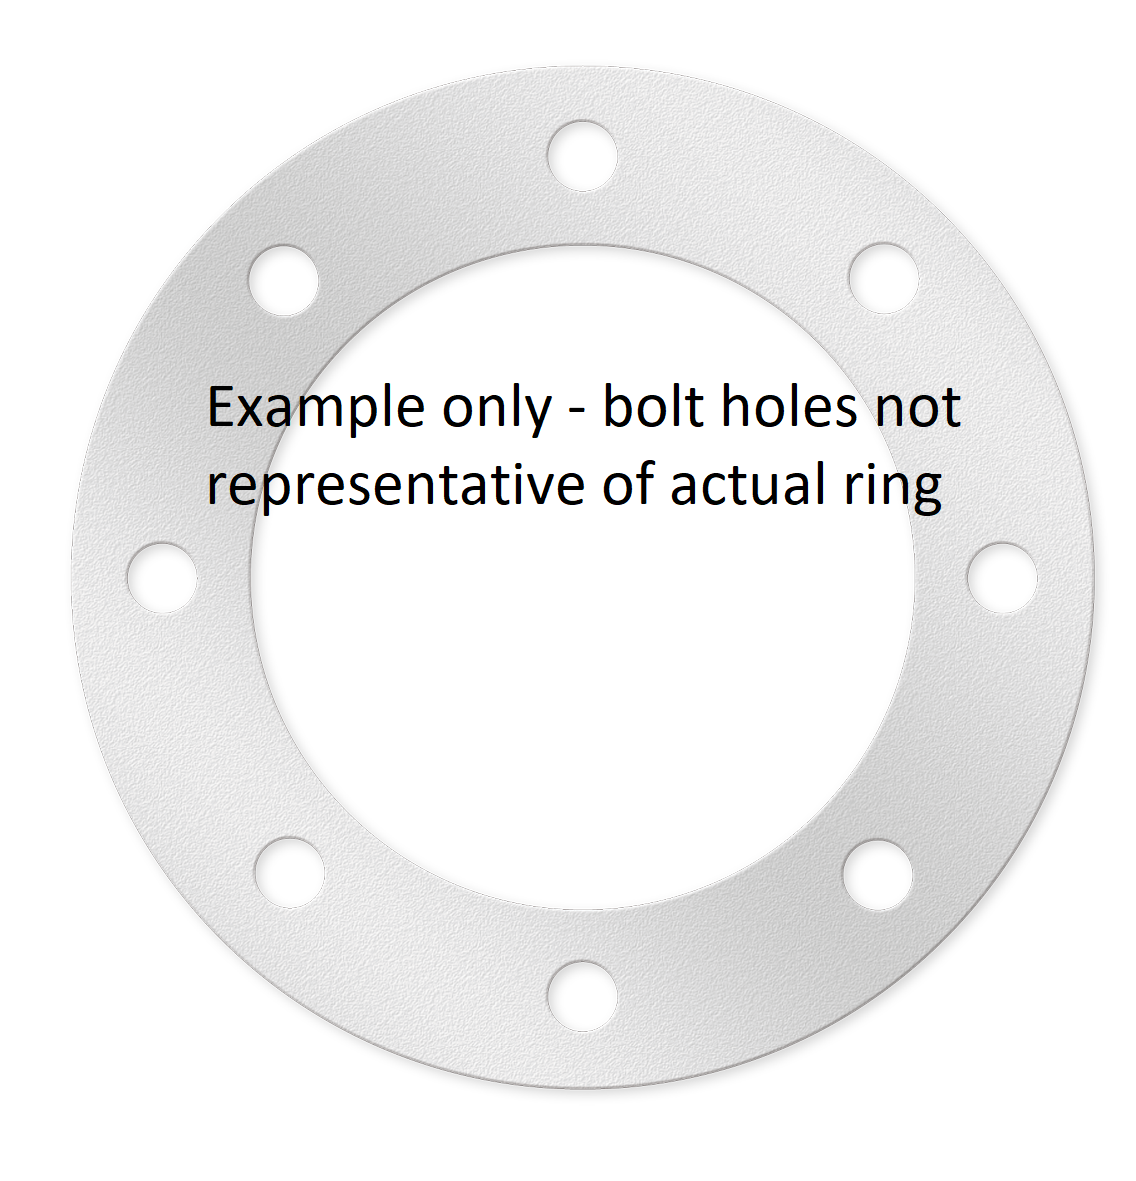 140 AS4087 B7 BACKING RING STAINLESS STEEL TO SUIT PE